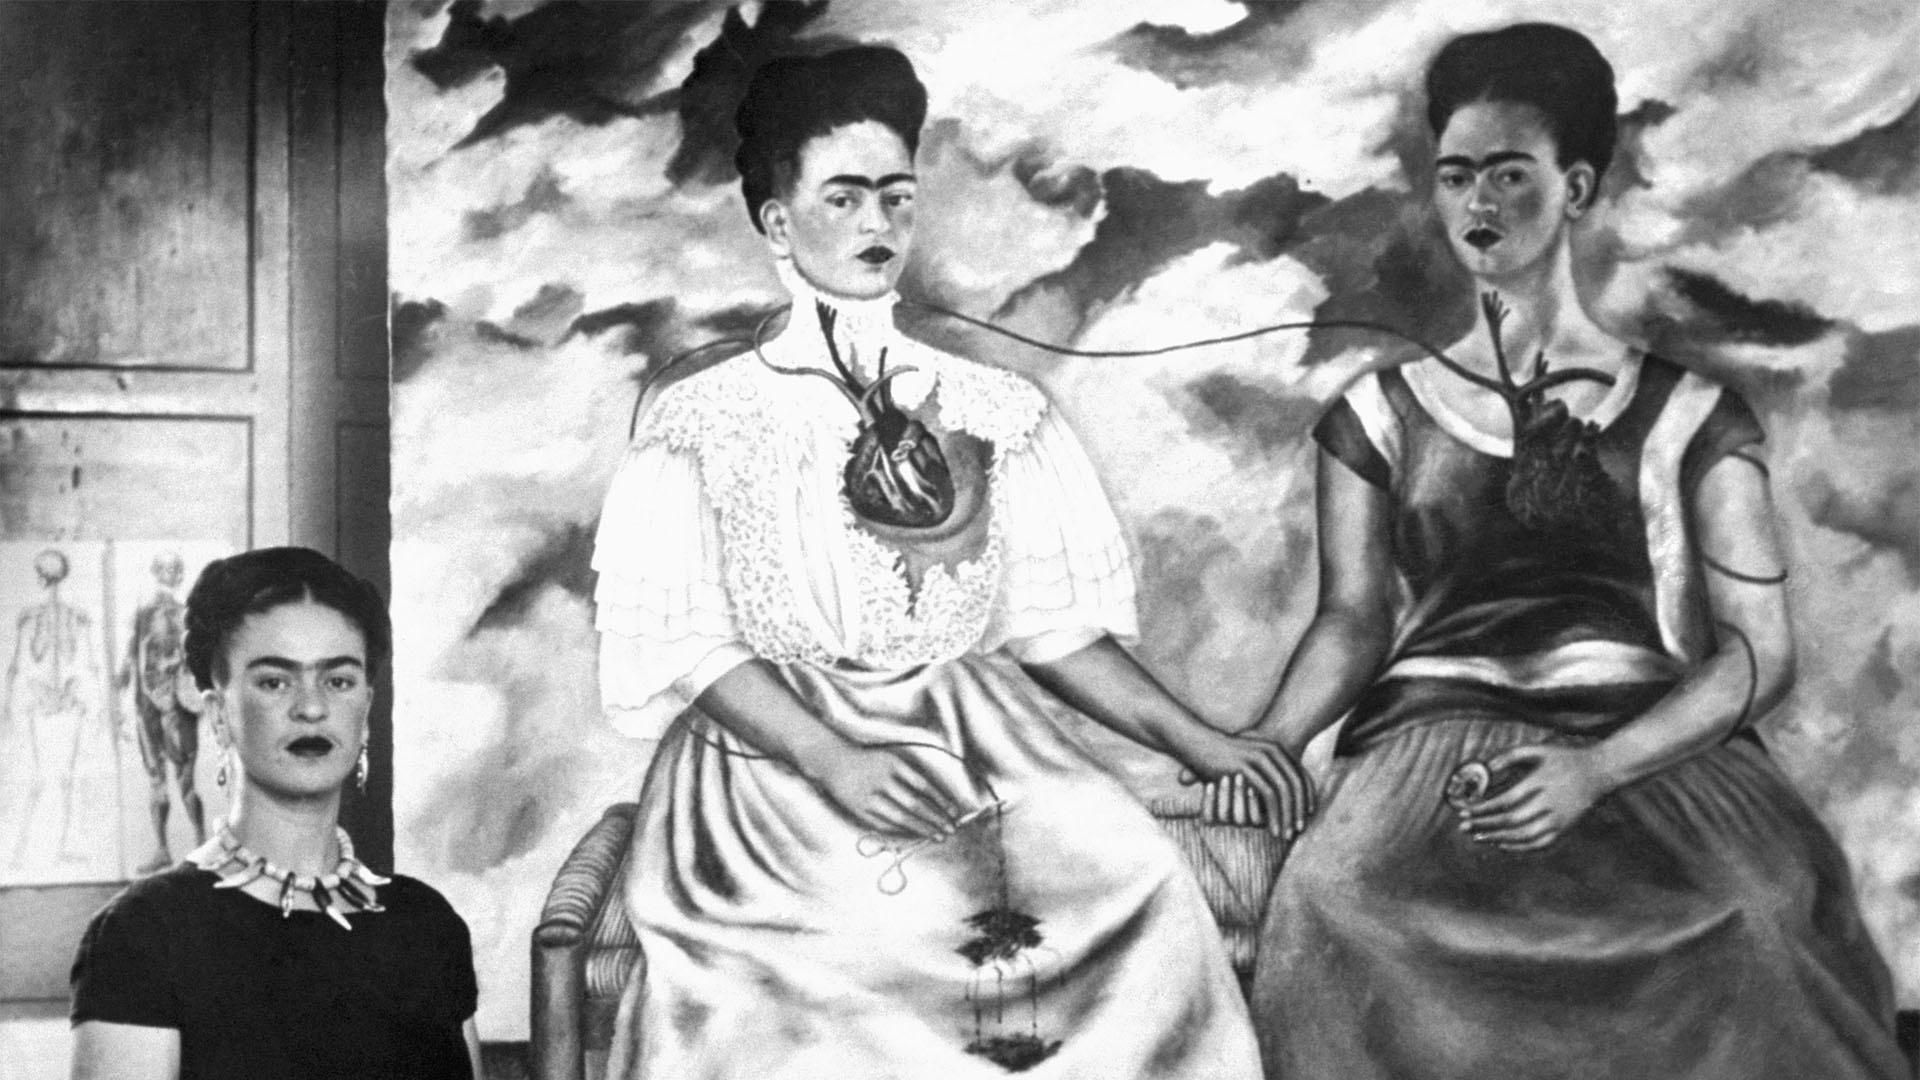 Frida Kahlo pictured with her oil painting “The Two Fridas” in 1939.